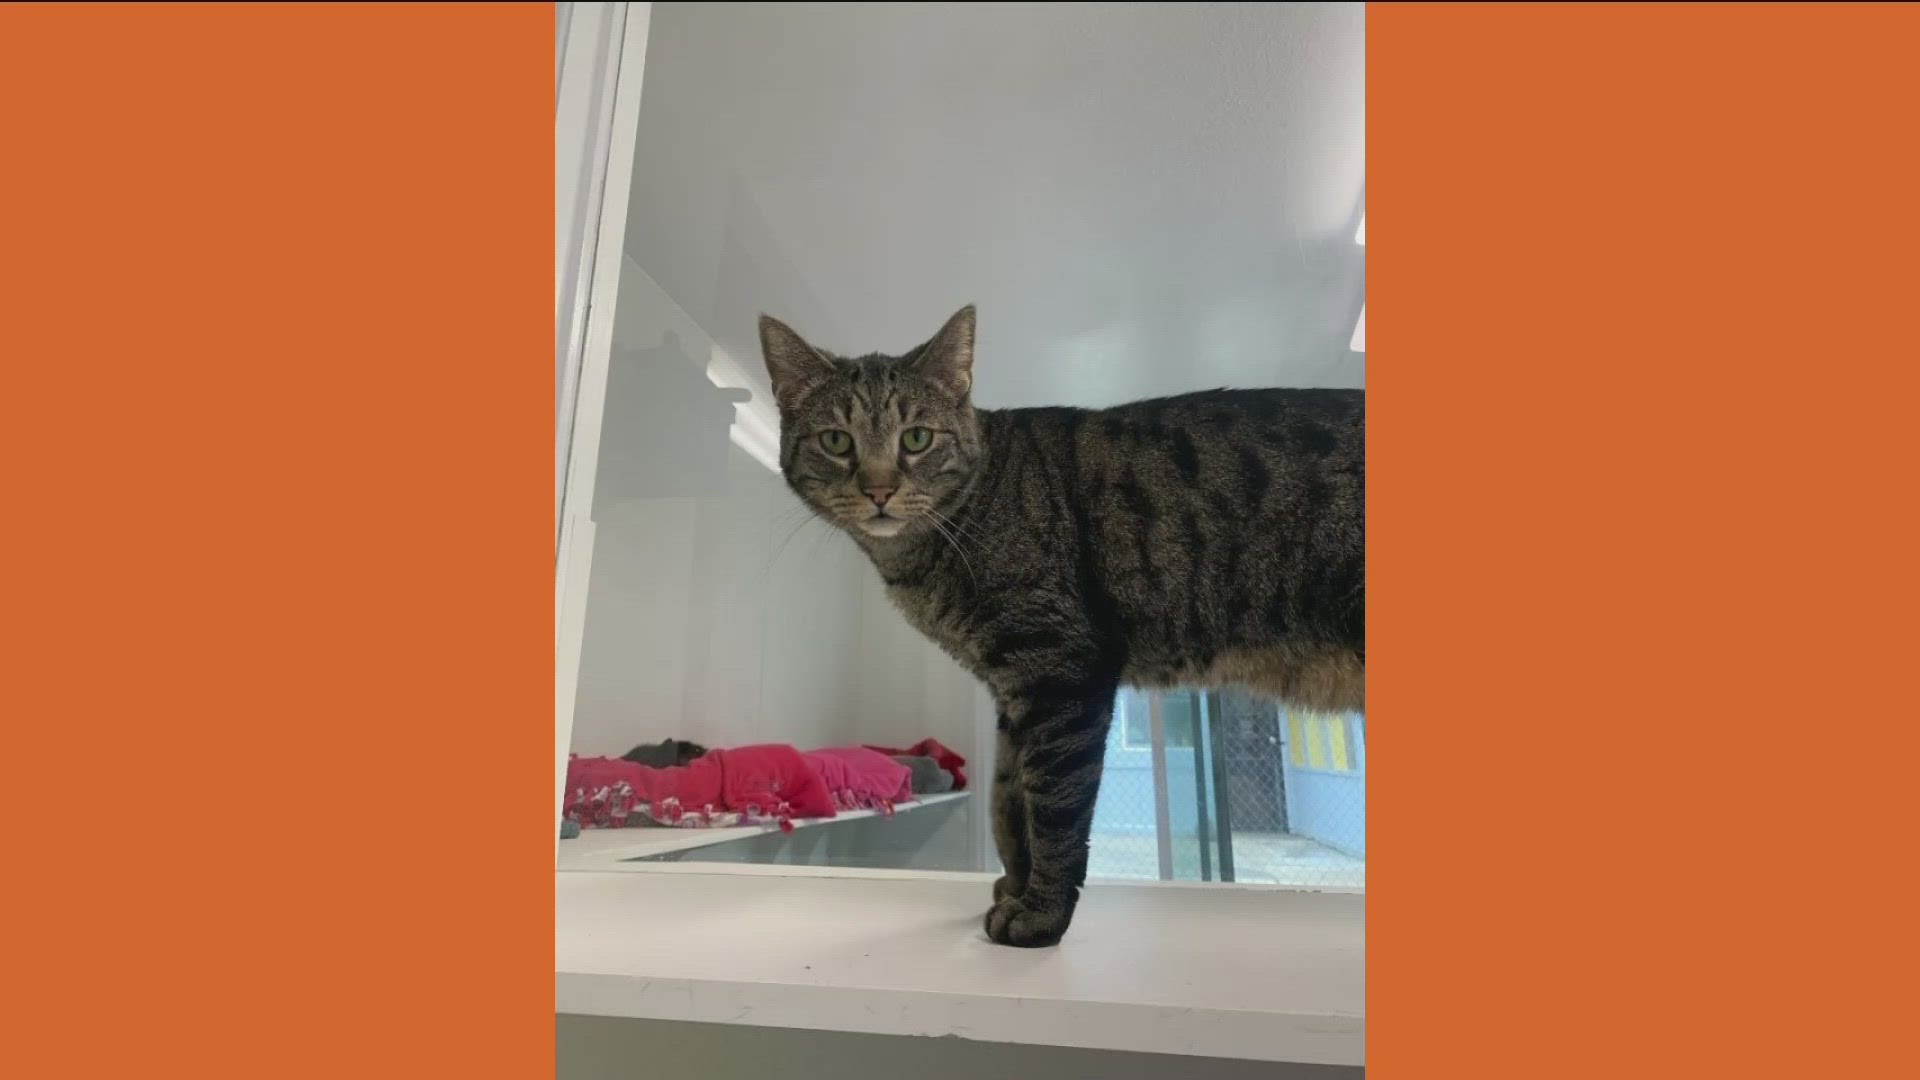 Donald is a very sweet and affectionate boy, he’s the kind of cat who will follow you around the whole room just for some love and attention.